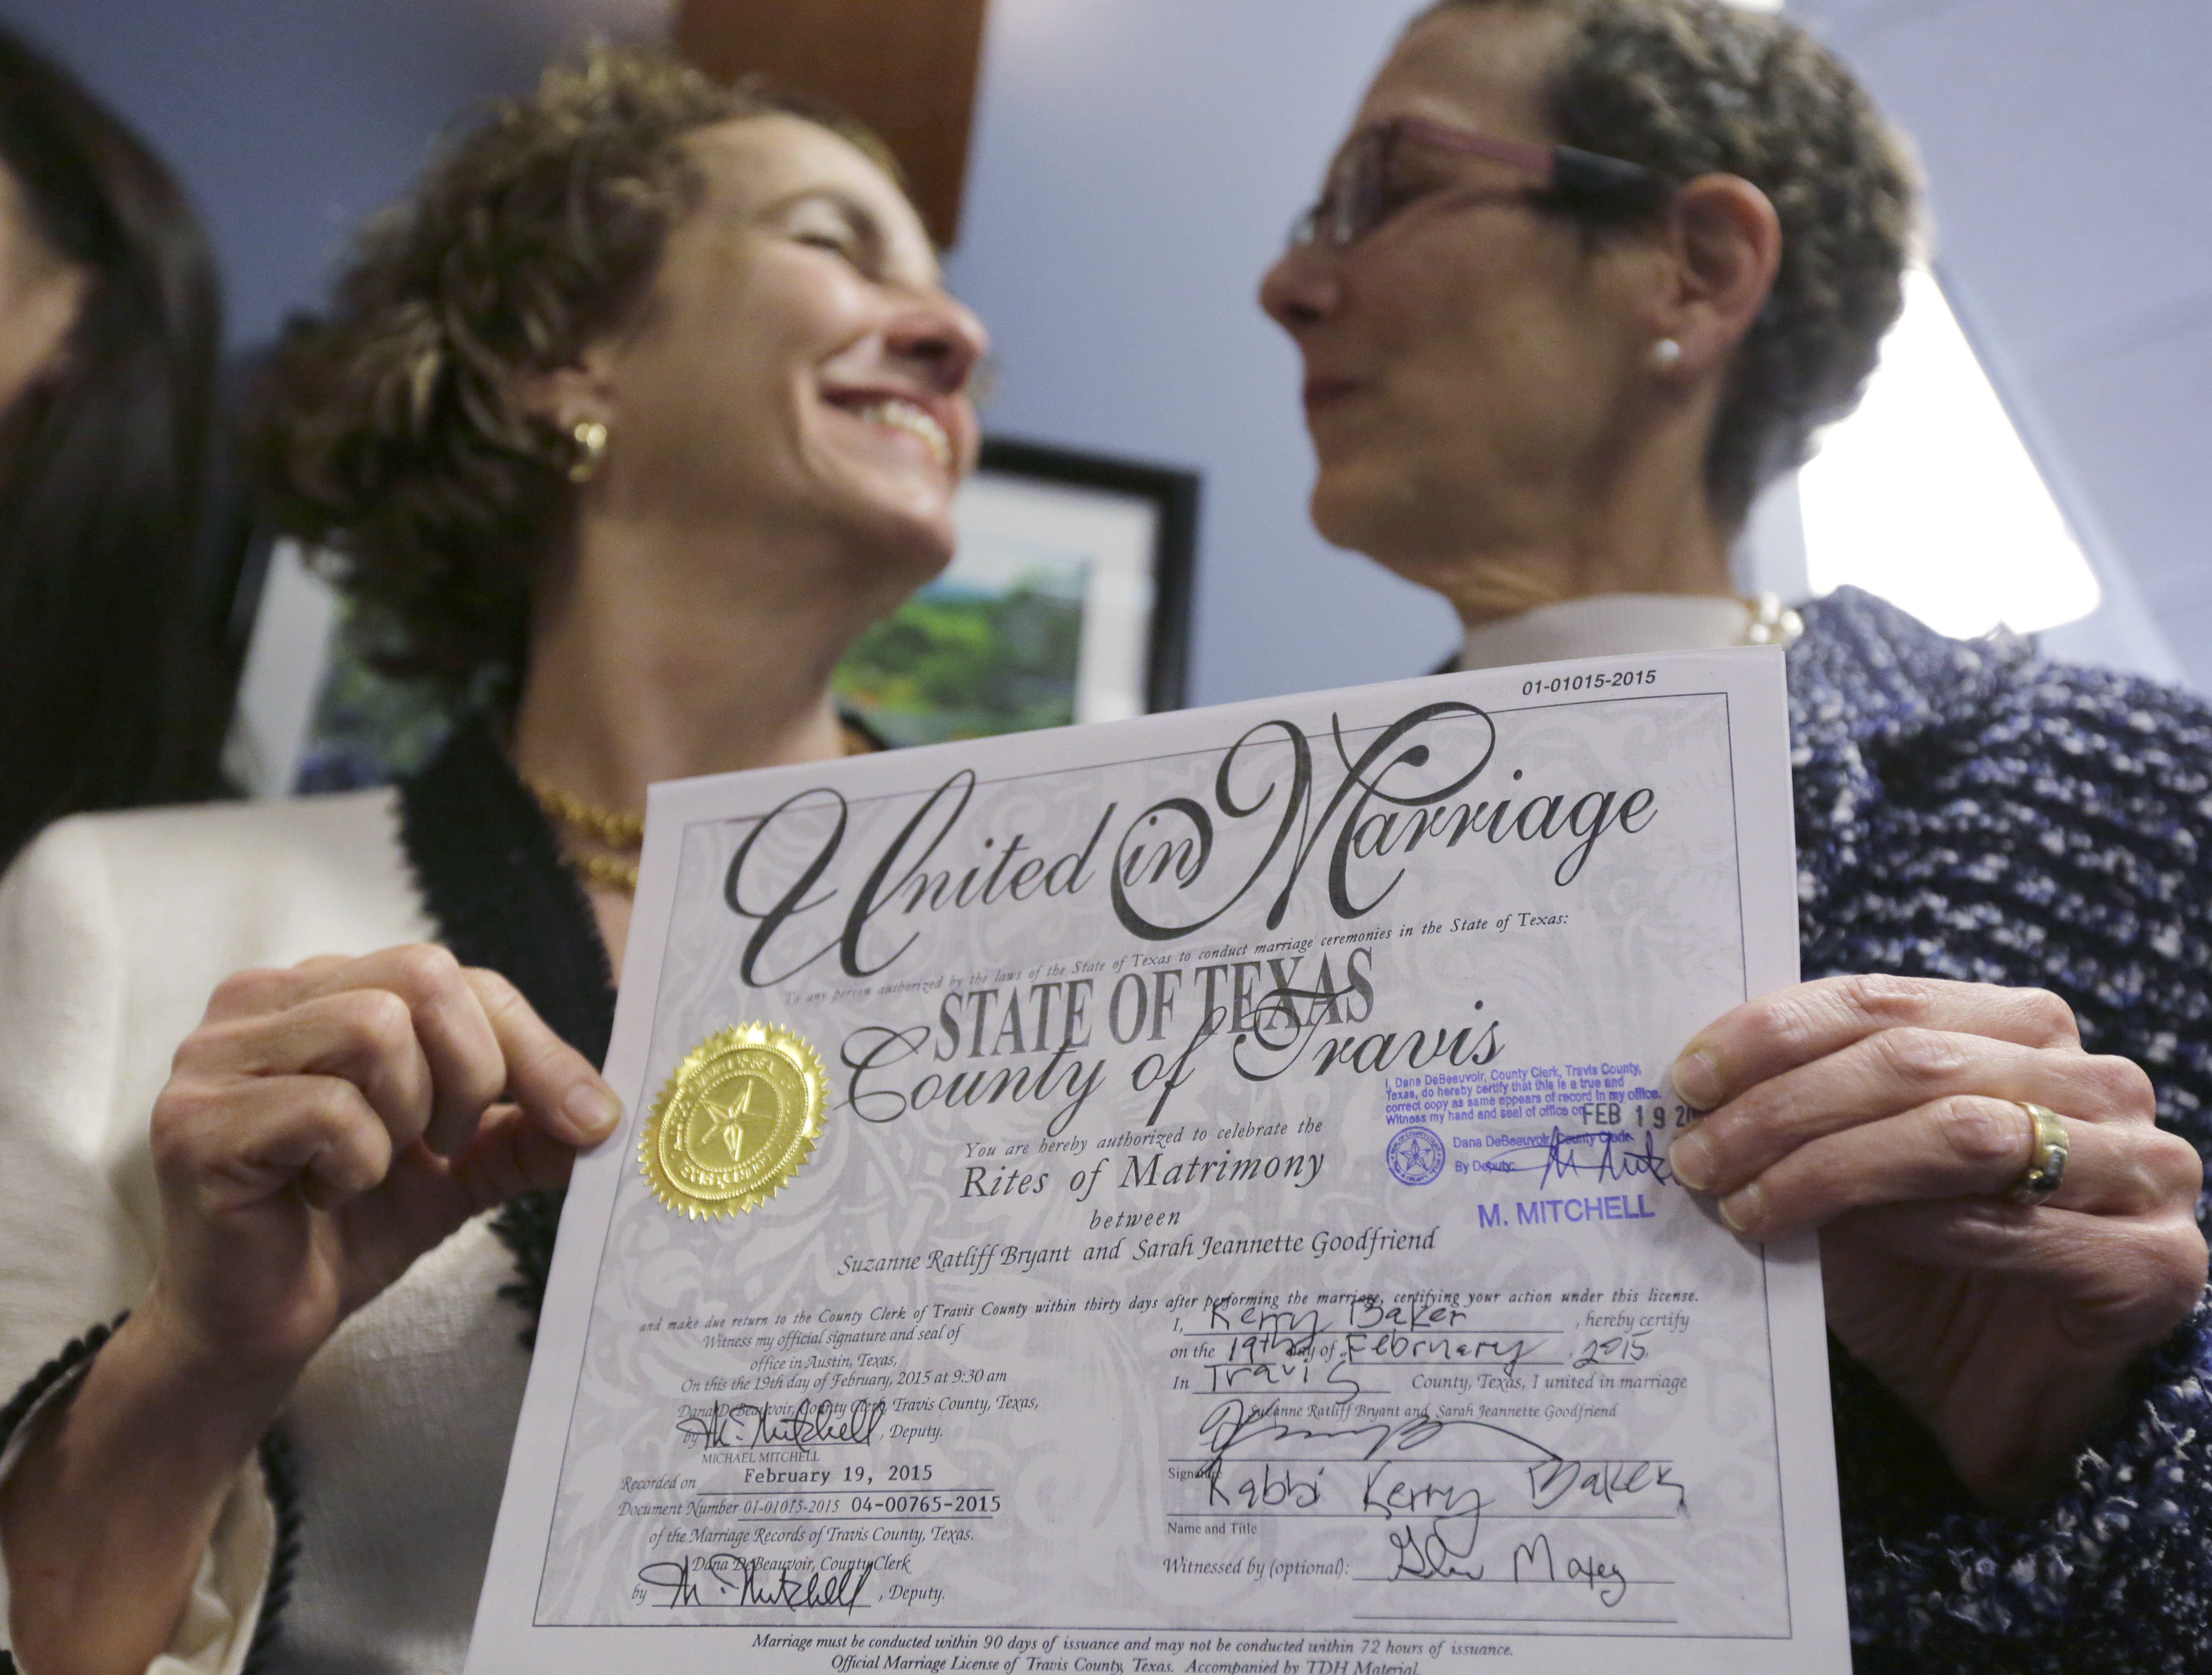 Texas Supreme Court stays other gay nuptials after 2 women